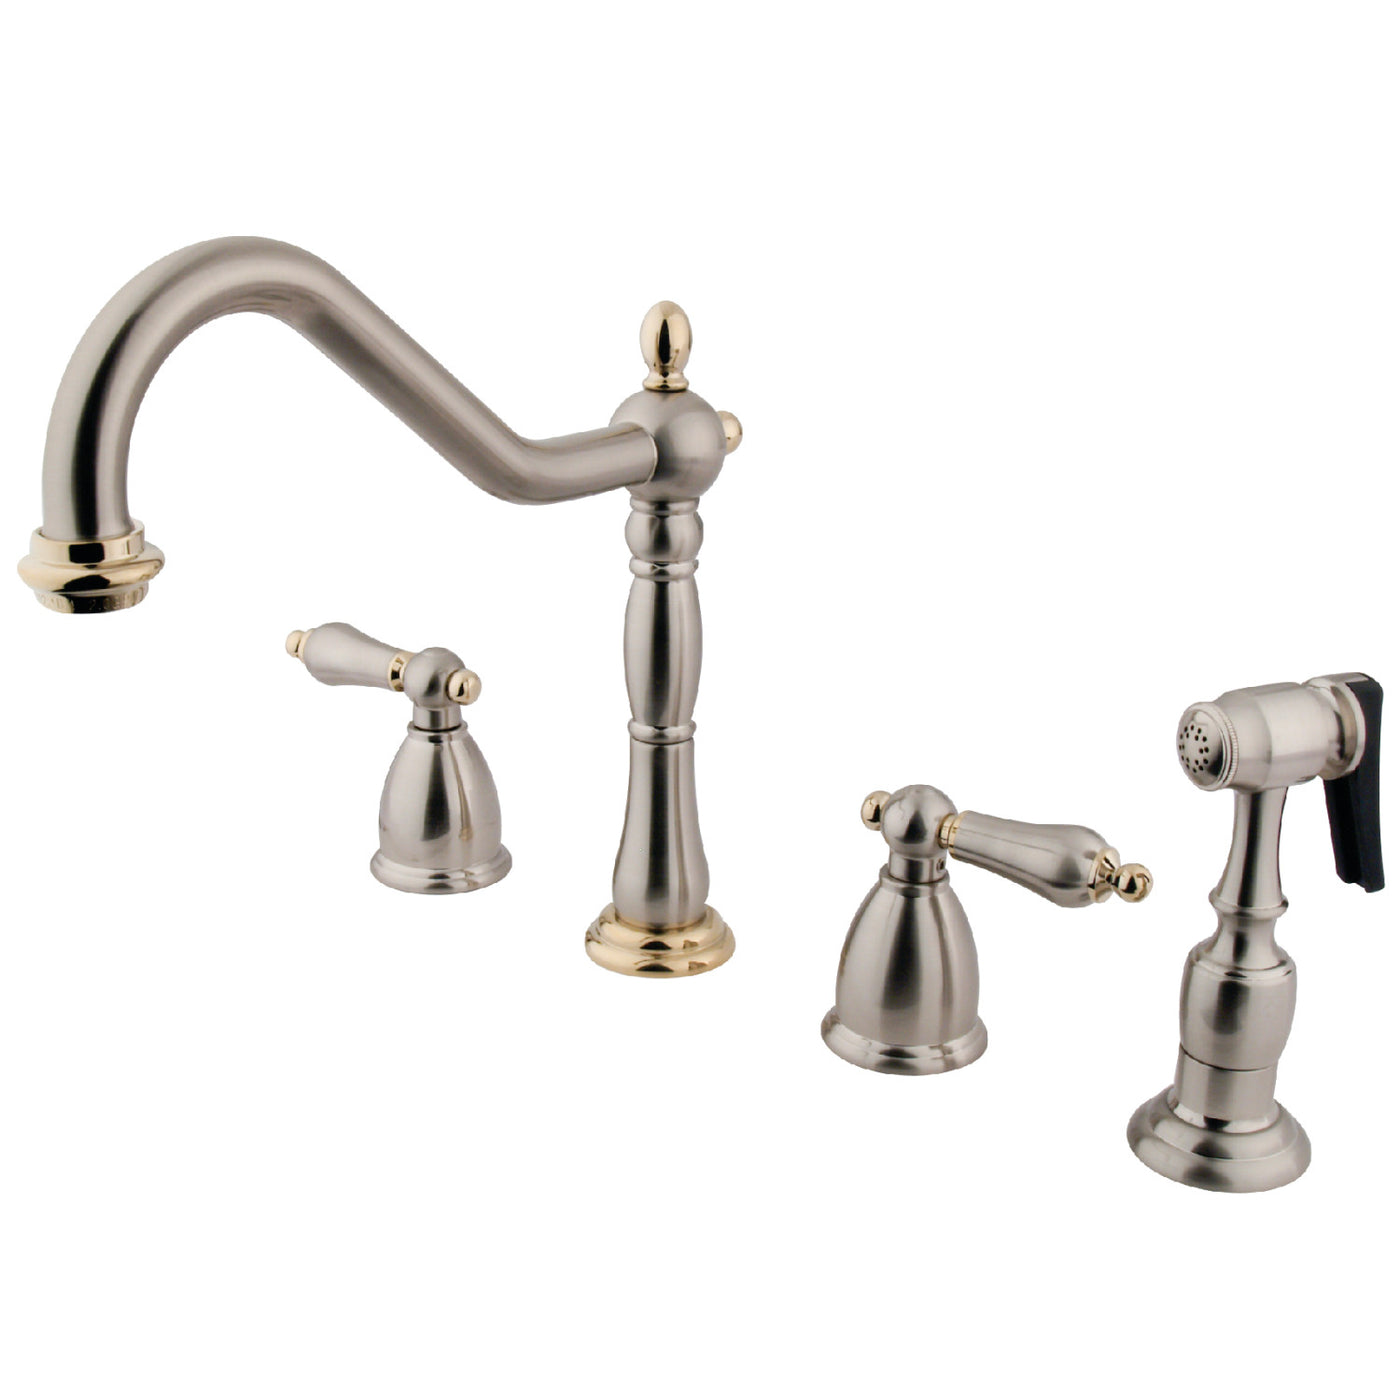 Elements of Design EB1799ALBS Widespread Kitchen Faucet with Brass Sprayer, Brushed Nickel/Polished Brass